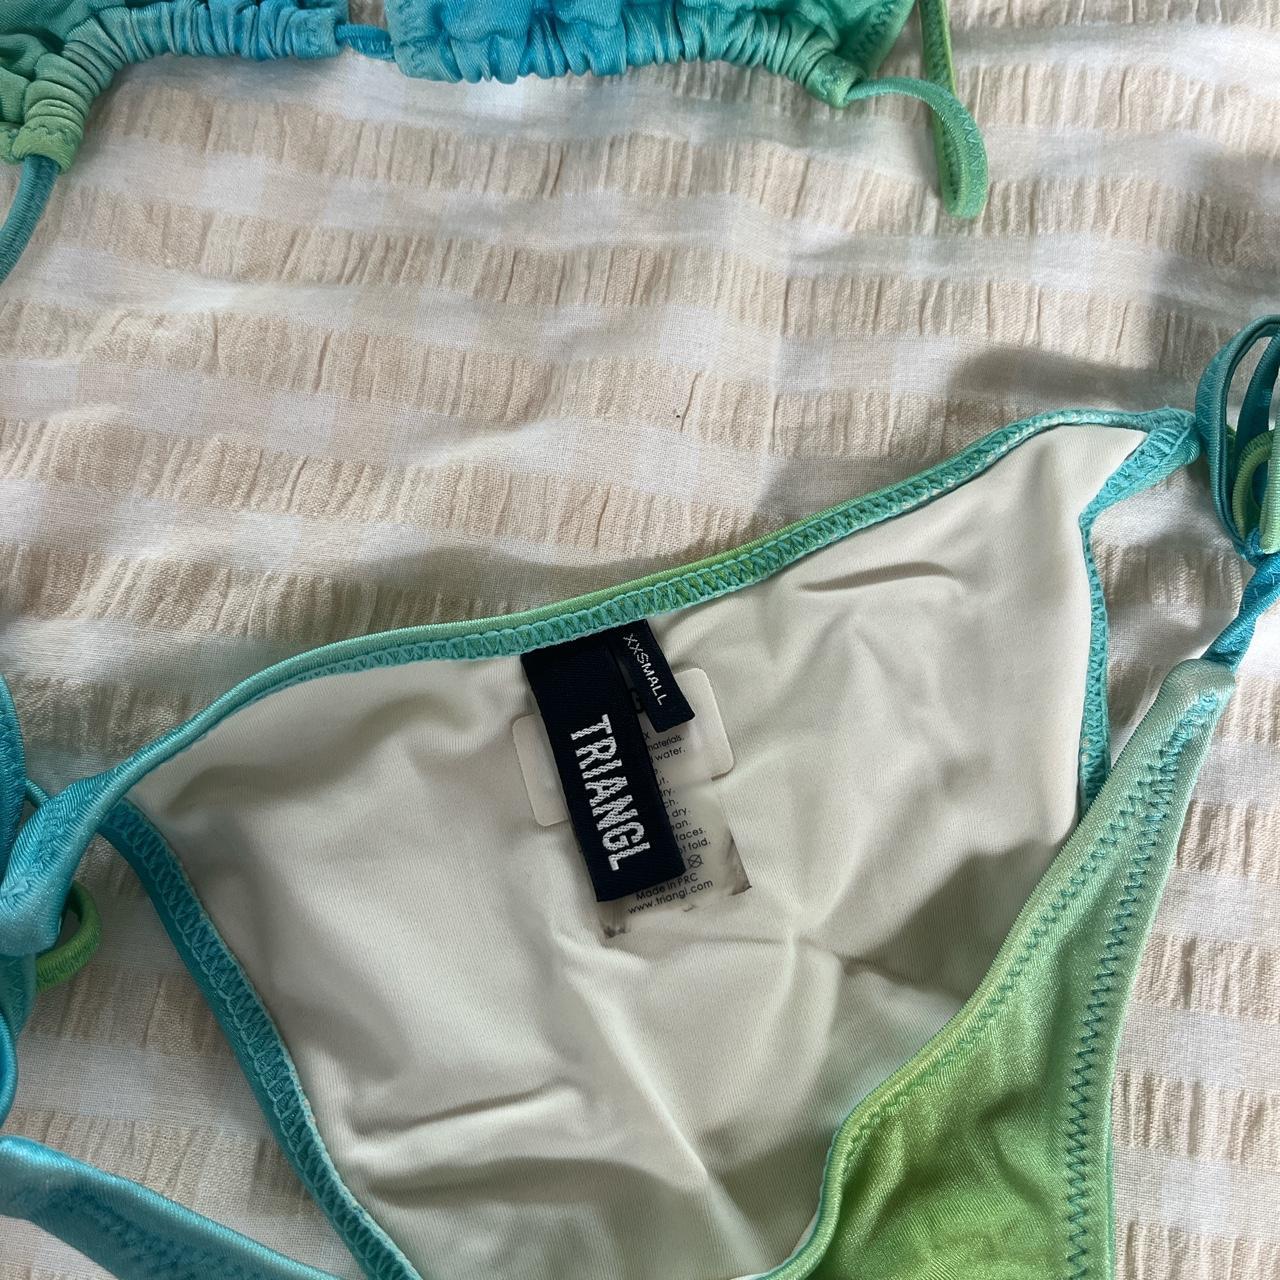 Triangl Bikinis - green and blue fade comes with the... - Depop